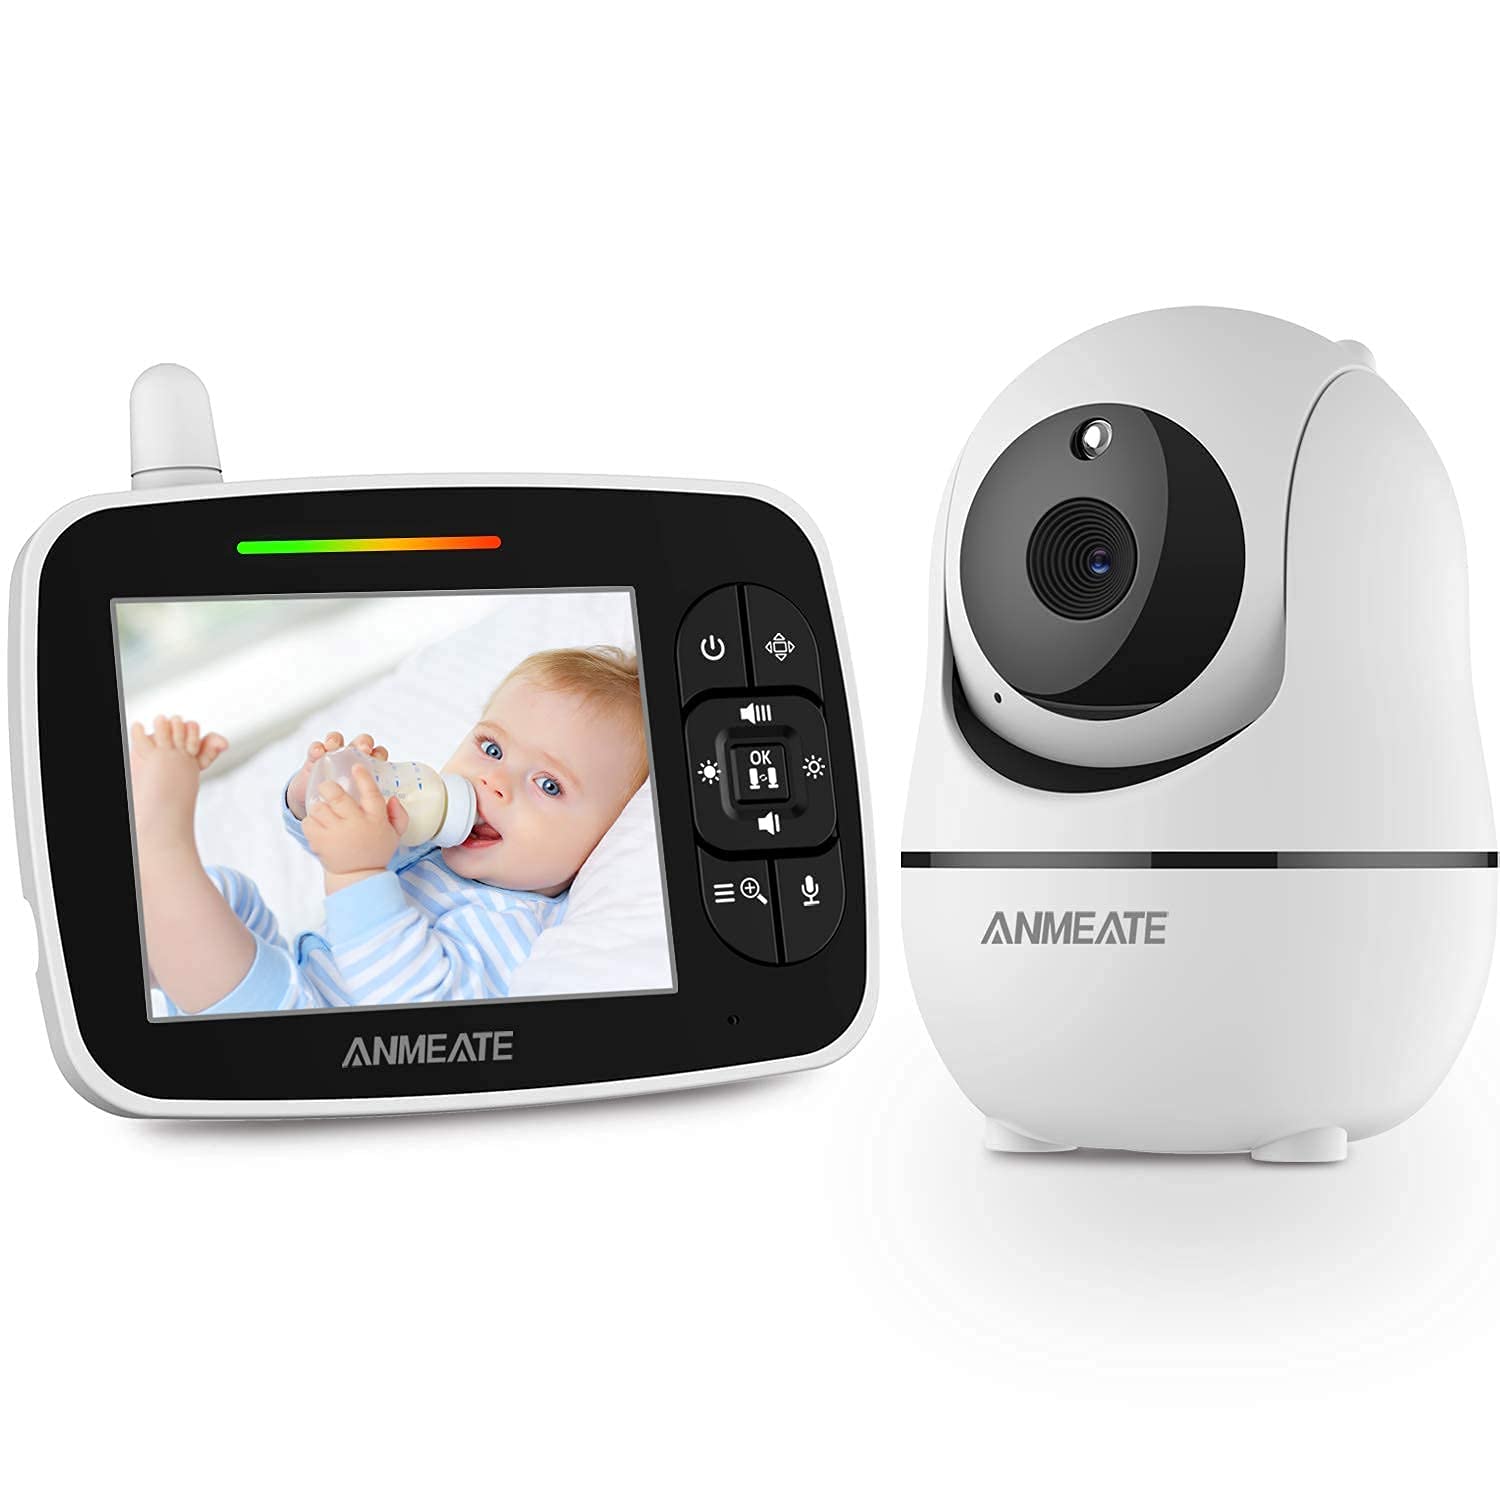 ANMEATE Baby Monitor review